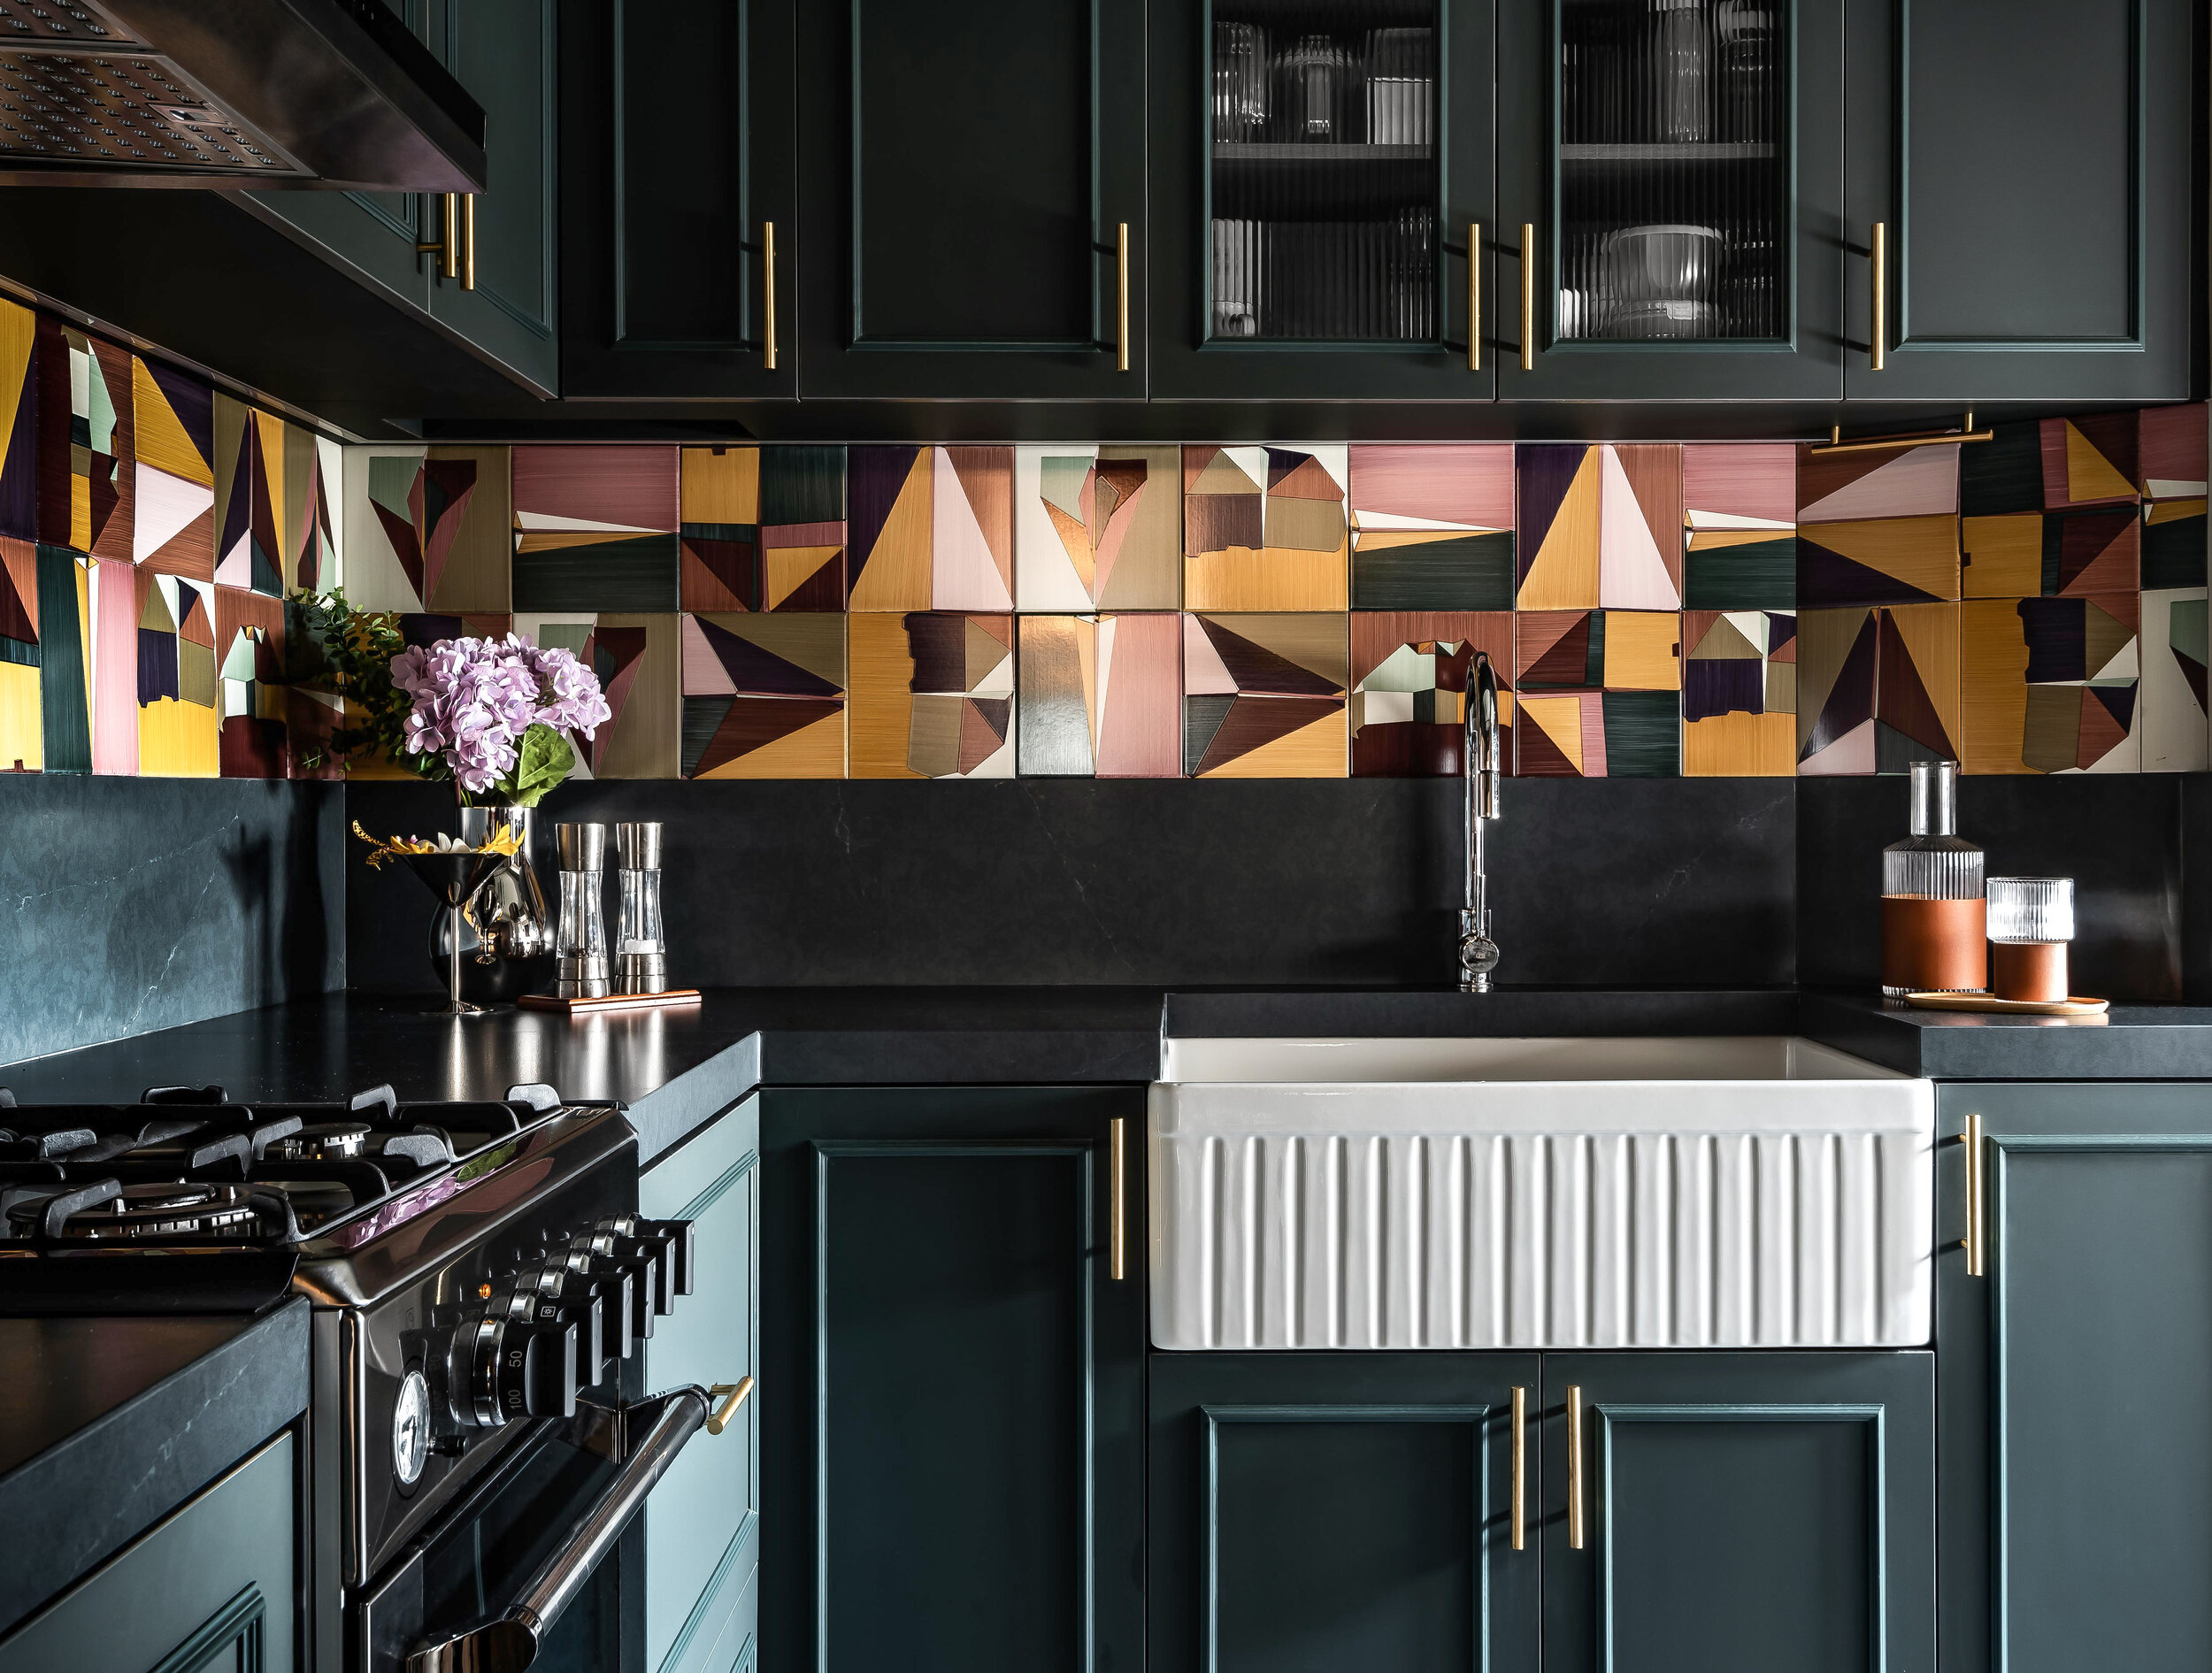  APARTMENT / 2019  It blended the modern and classic in its interpretation of the traditional shaker-style kitchen with freestanding oven and farmhouse sink. The hand-painted tiles add an eclectic vocal point against the muted Dartmouth green cabinet